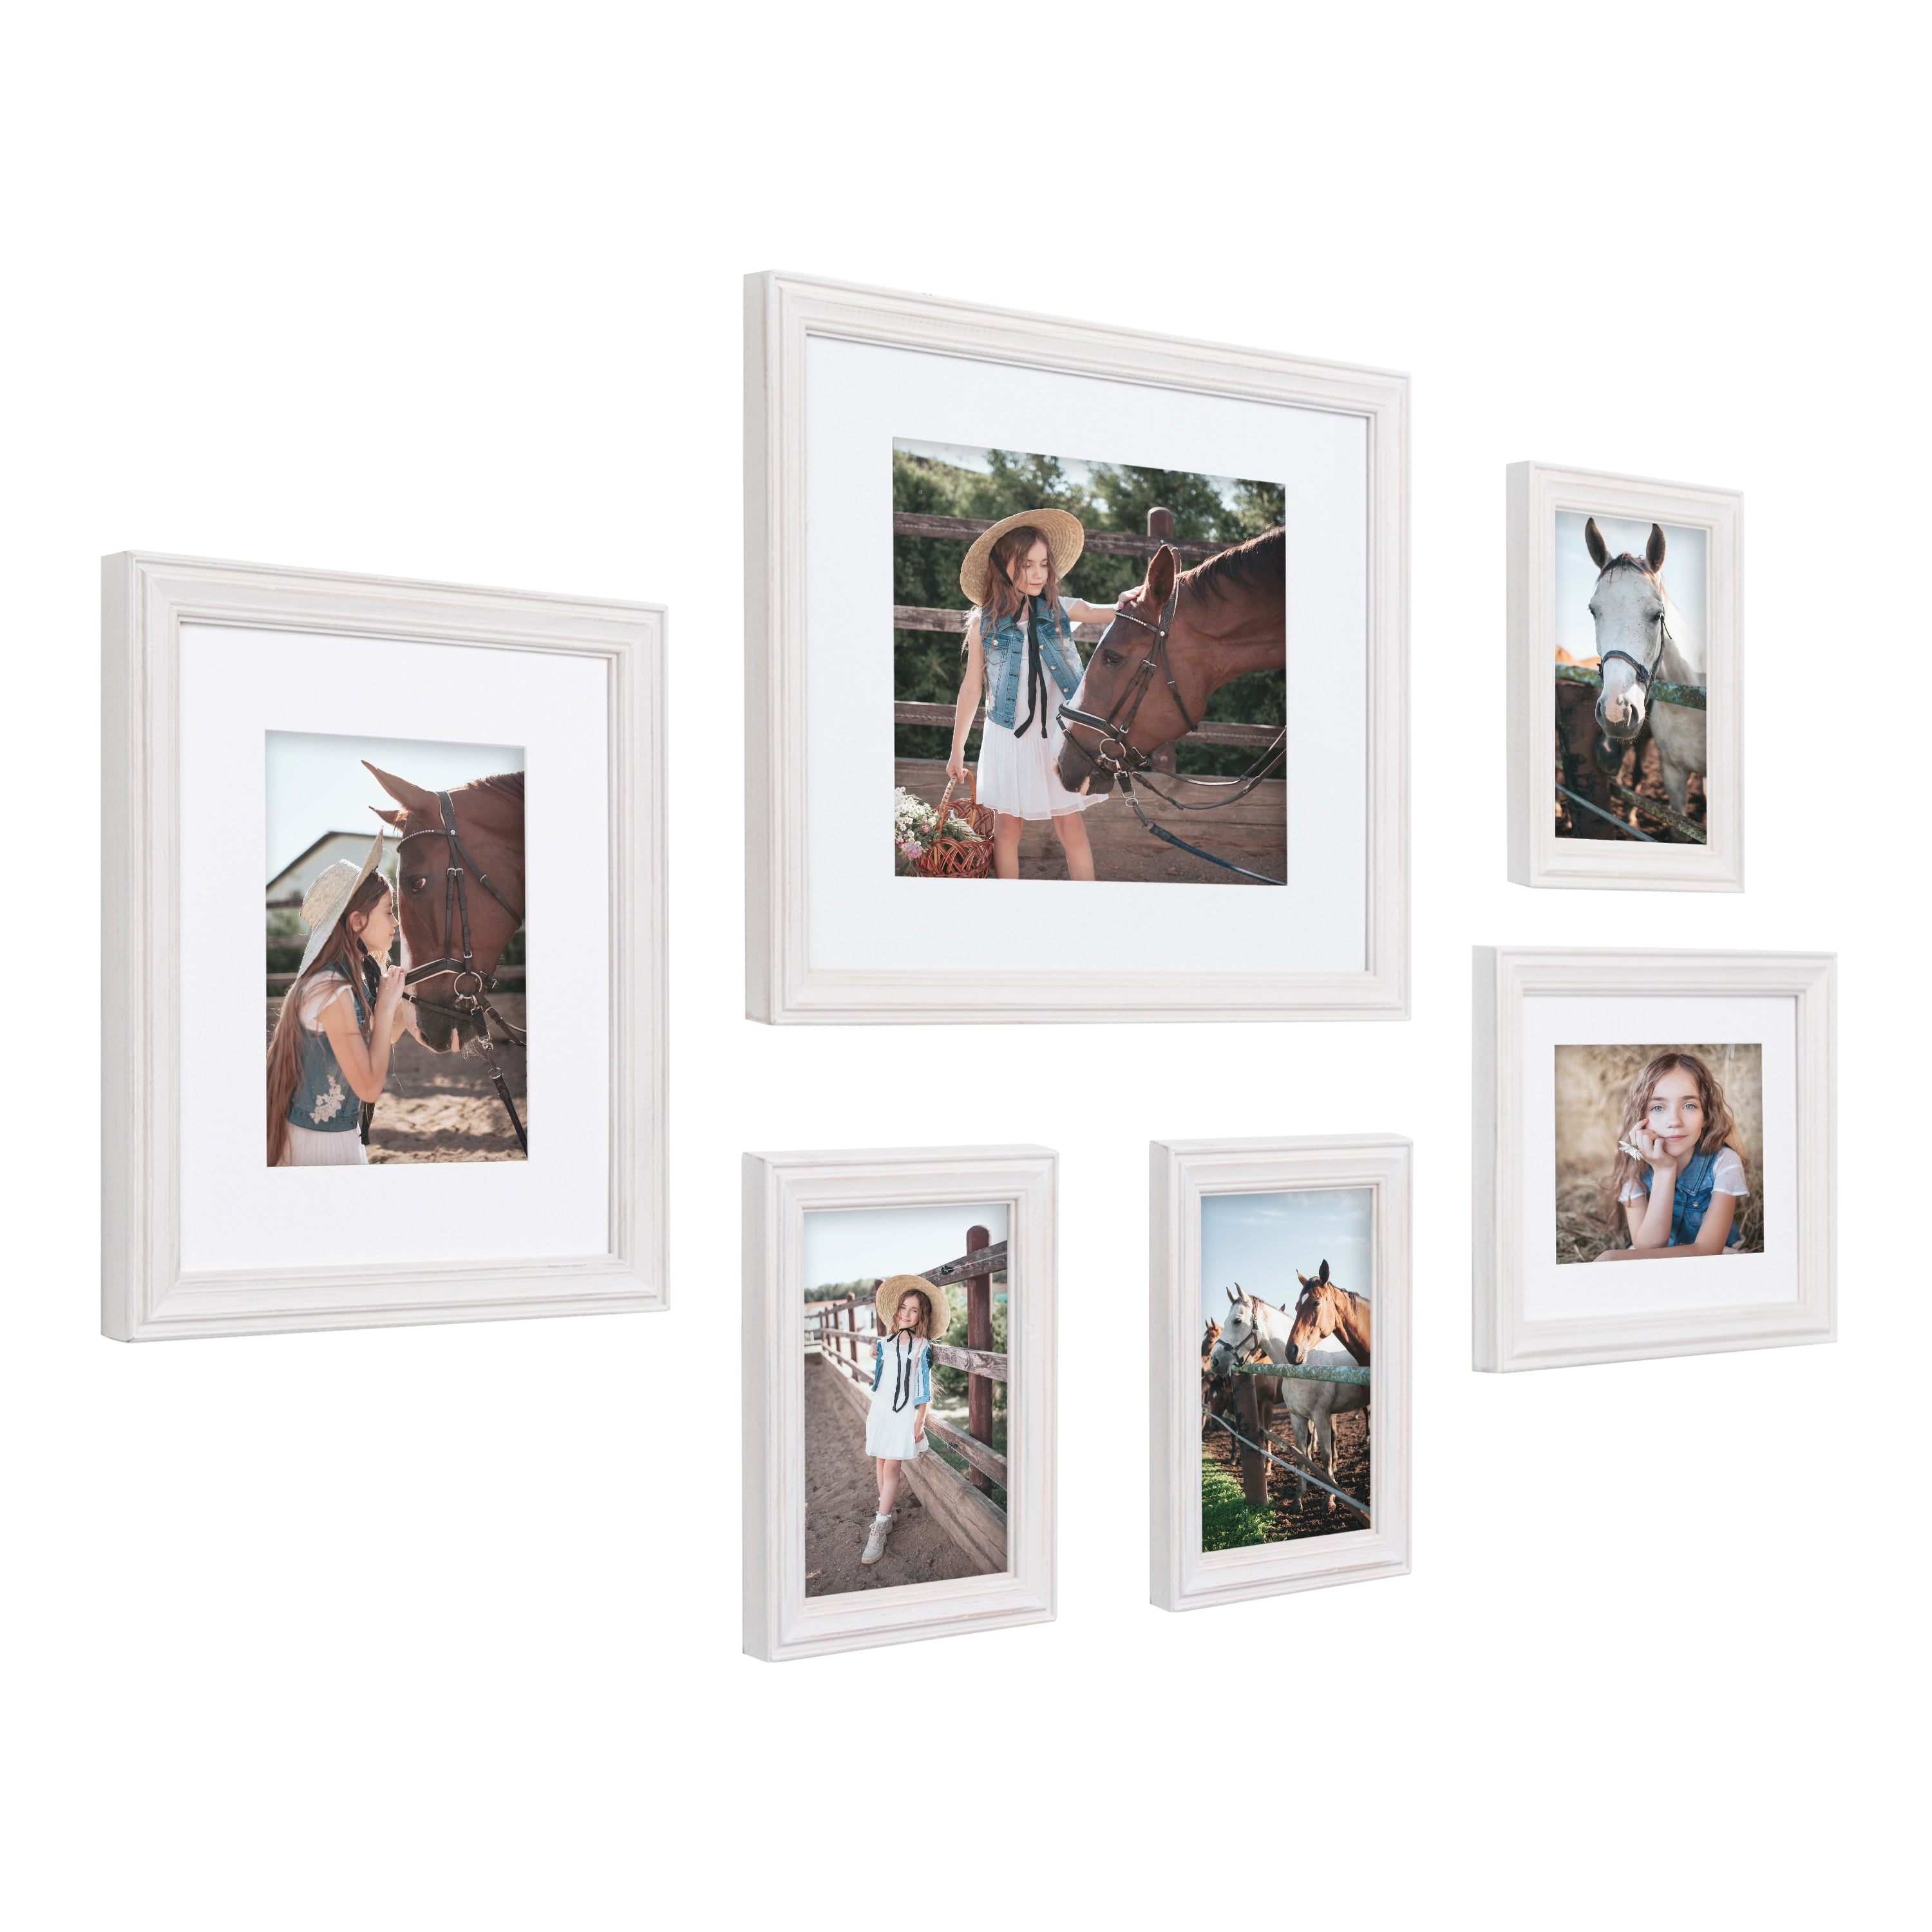 Metronic 5x7 Picture Frames Set of 6 - Distressed White Farmhouse Rustic Photo Frames, Large Wall Frame Set, Size: 5 x 7